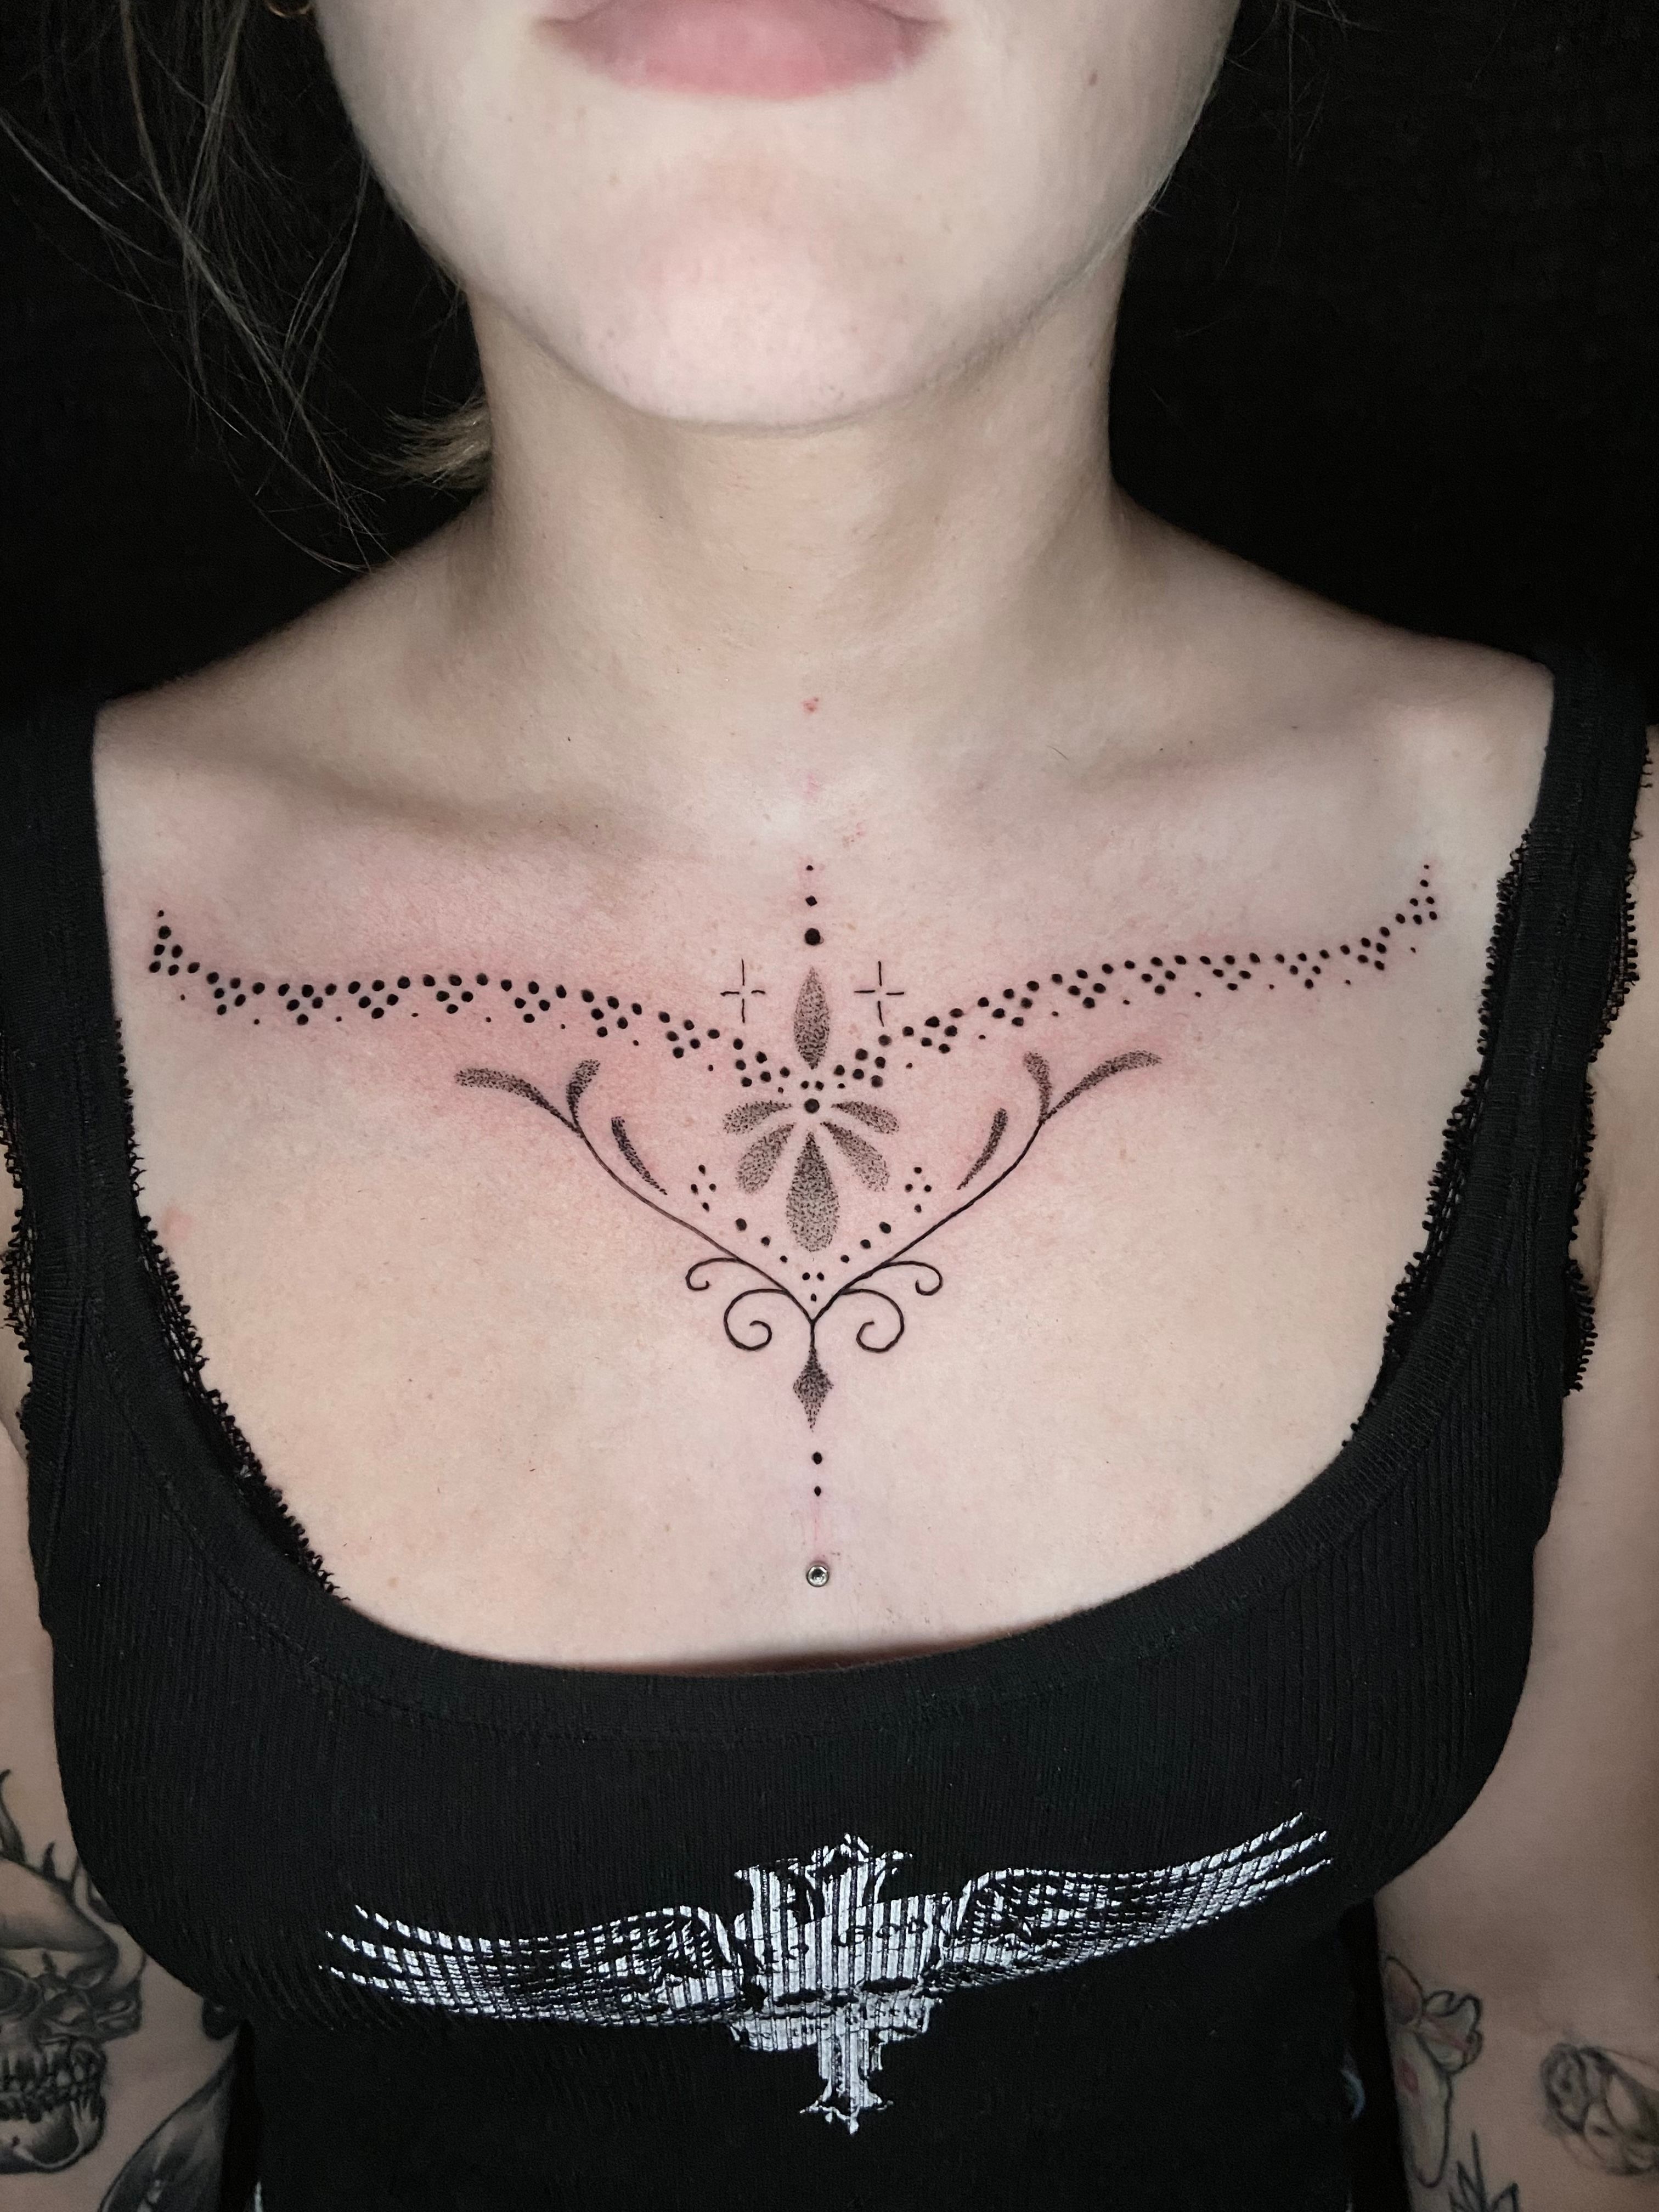 The Newest Chest Tattoos | inked-app.com